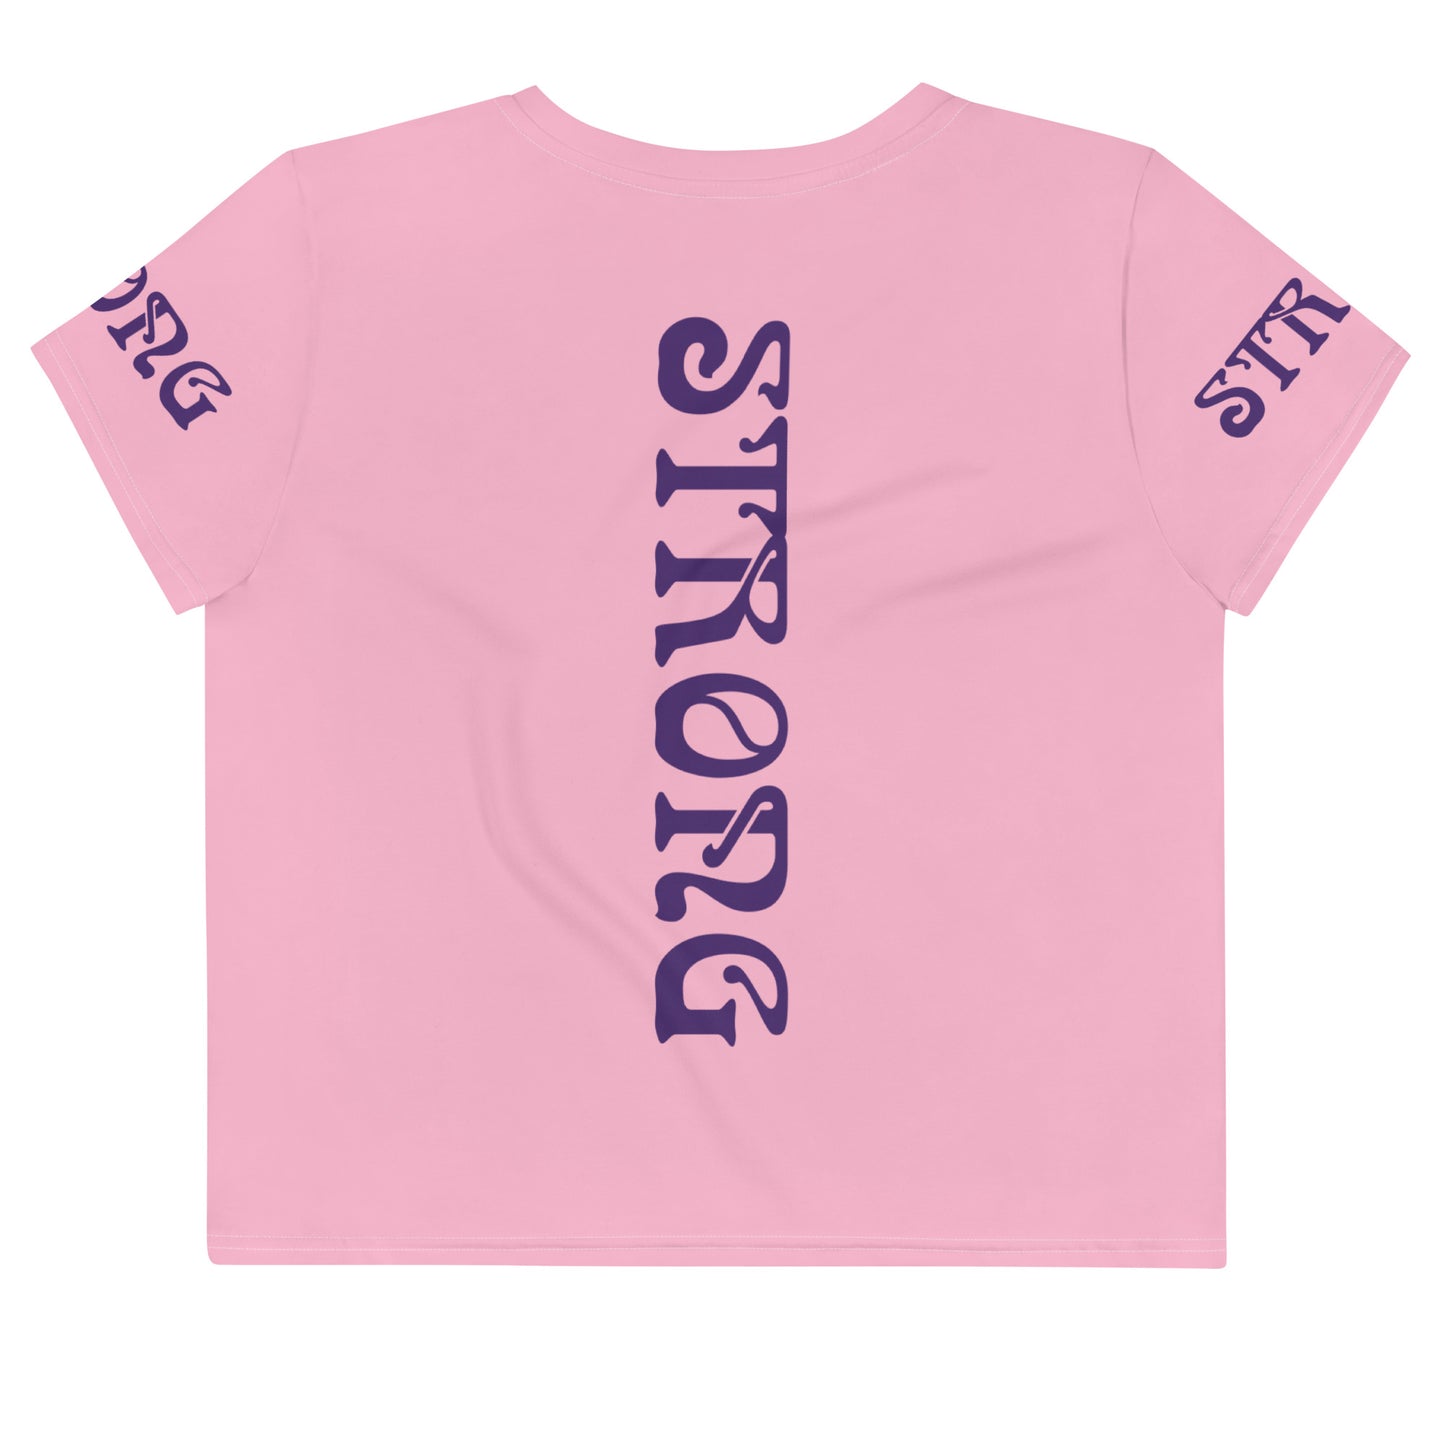 “STRONG”Cotton Candy Crop Tee W/Purple Font